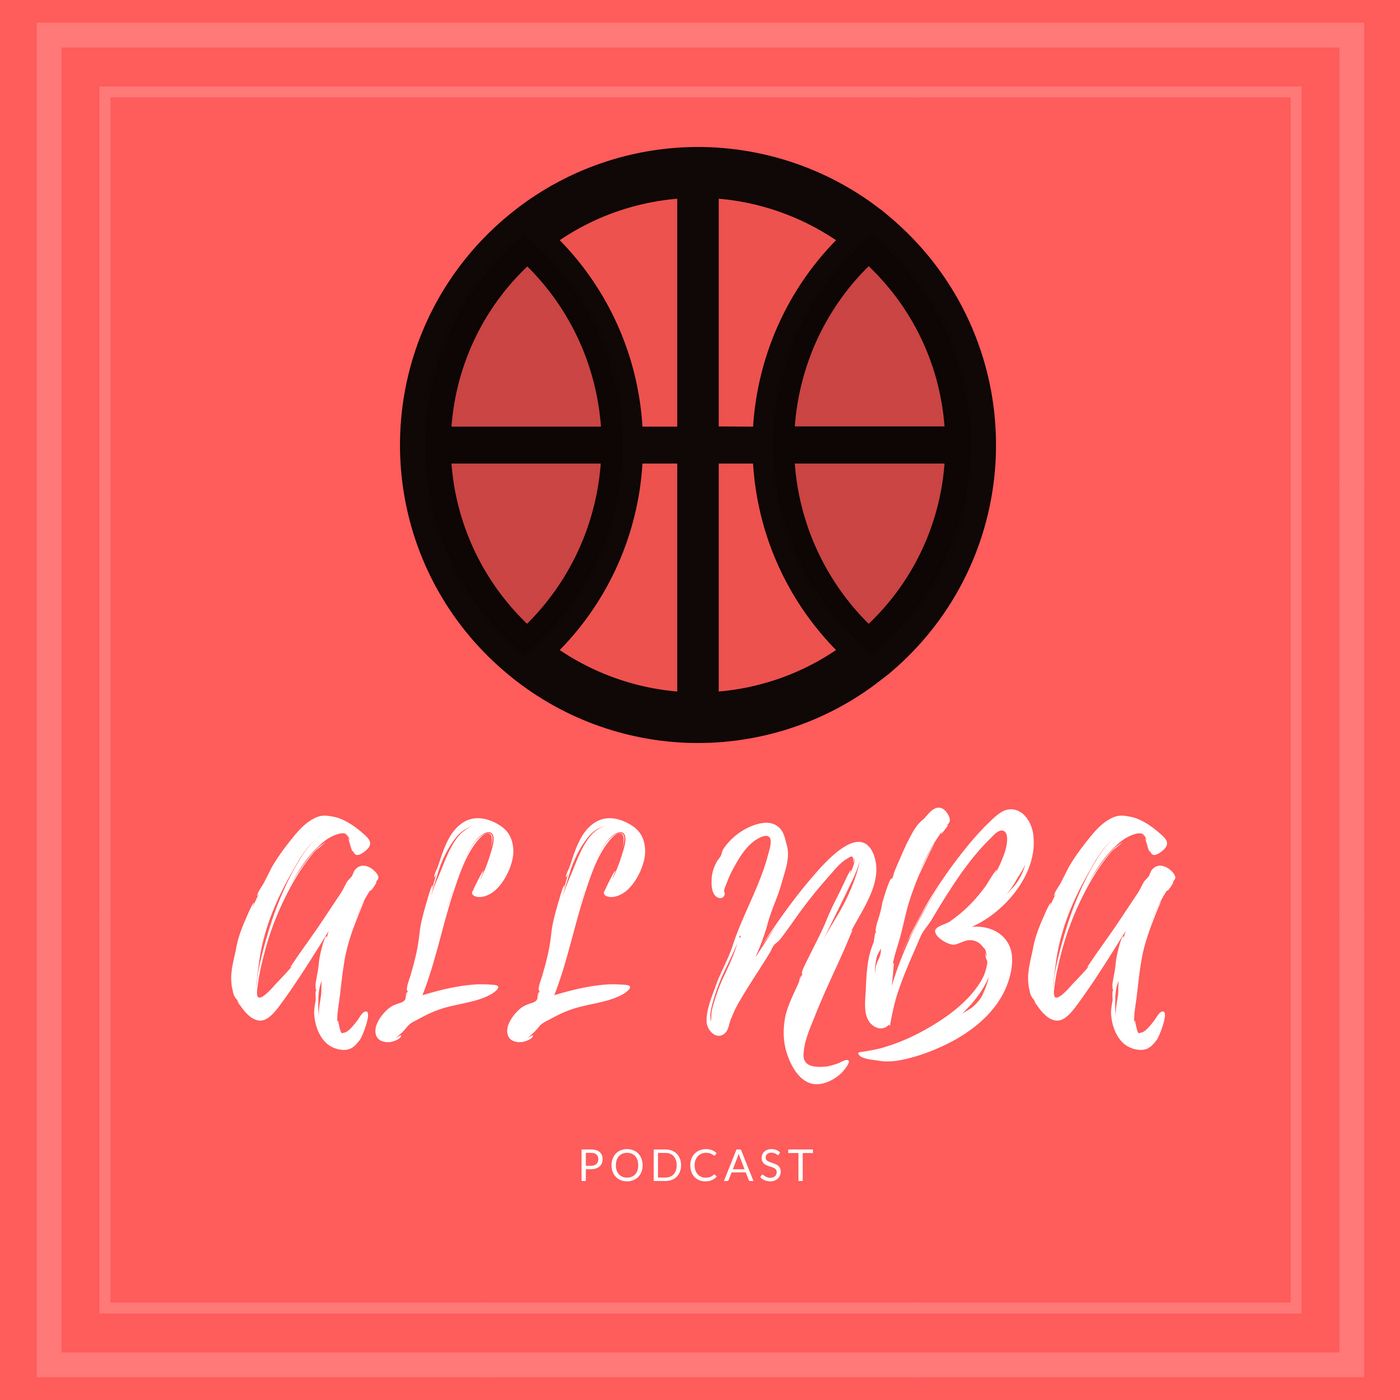 Stream All NBA Podcast music Listen to songs, albums, playlists for free on SoundCloud